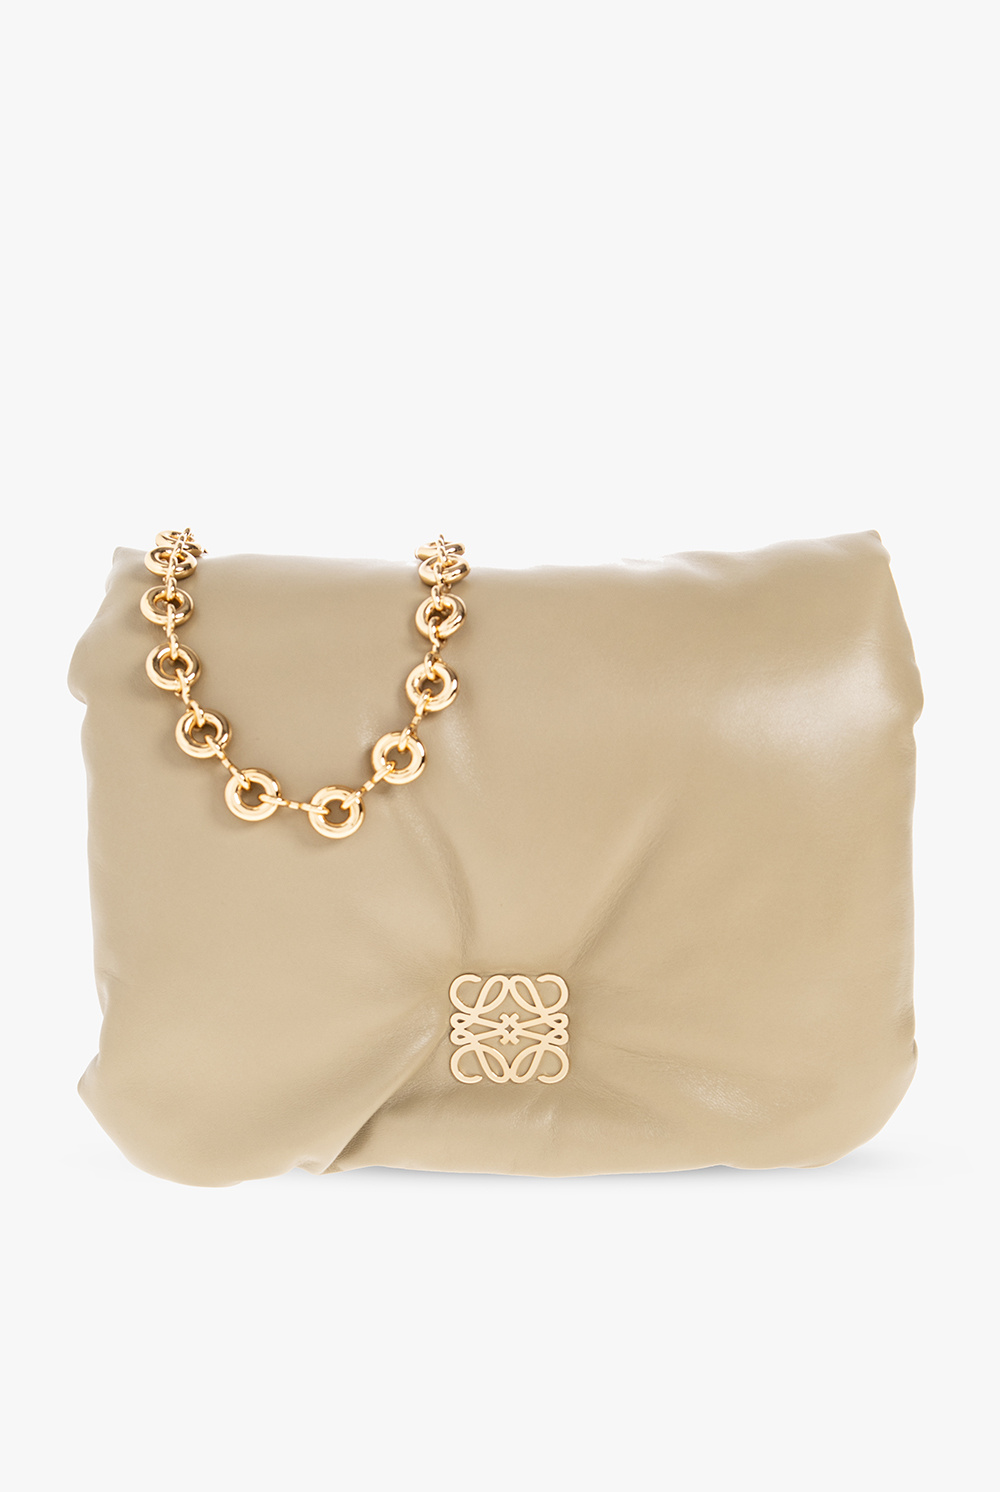 Brown Leather Puffer Goya Gold Chain Shoulder Bag - GBNY